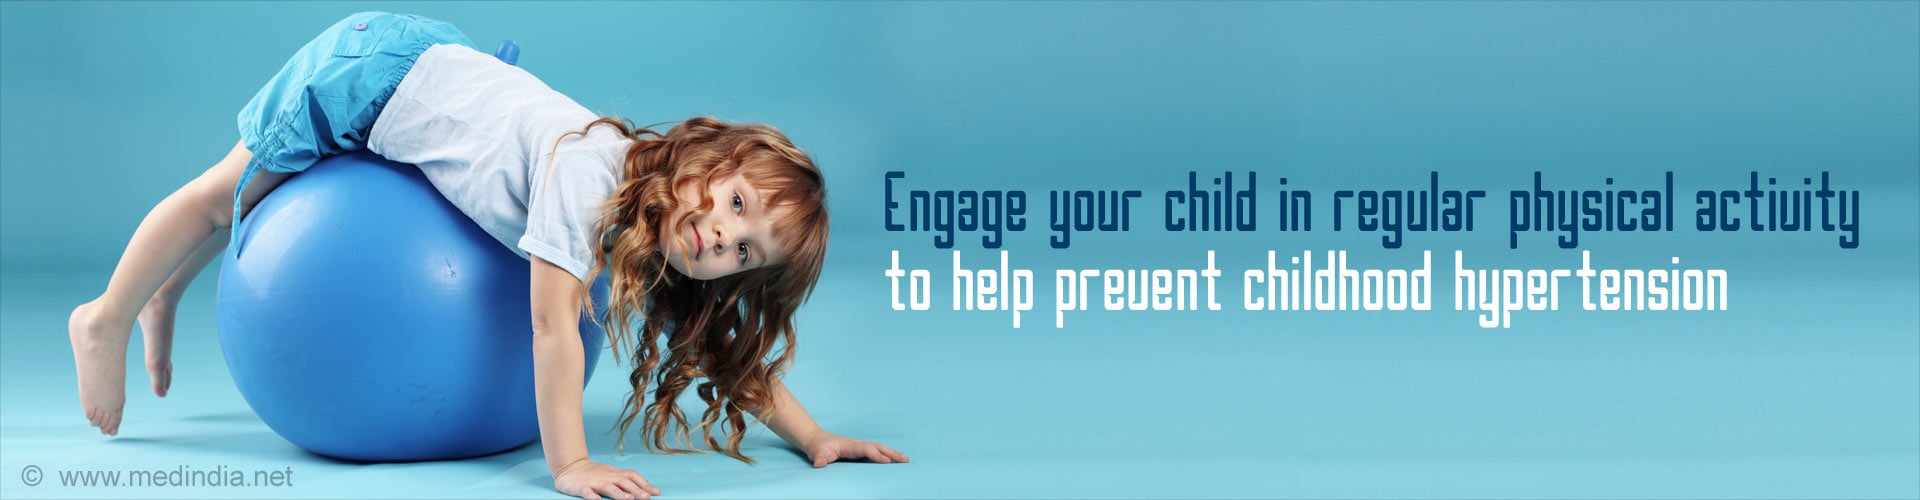 Engage your child in regular physical activity to help prevent childhood hypertension